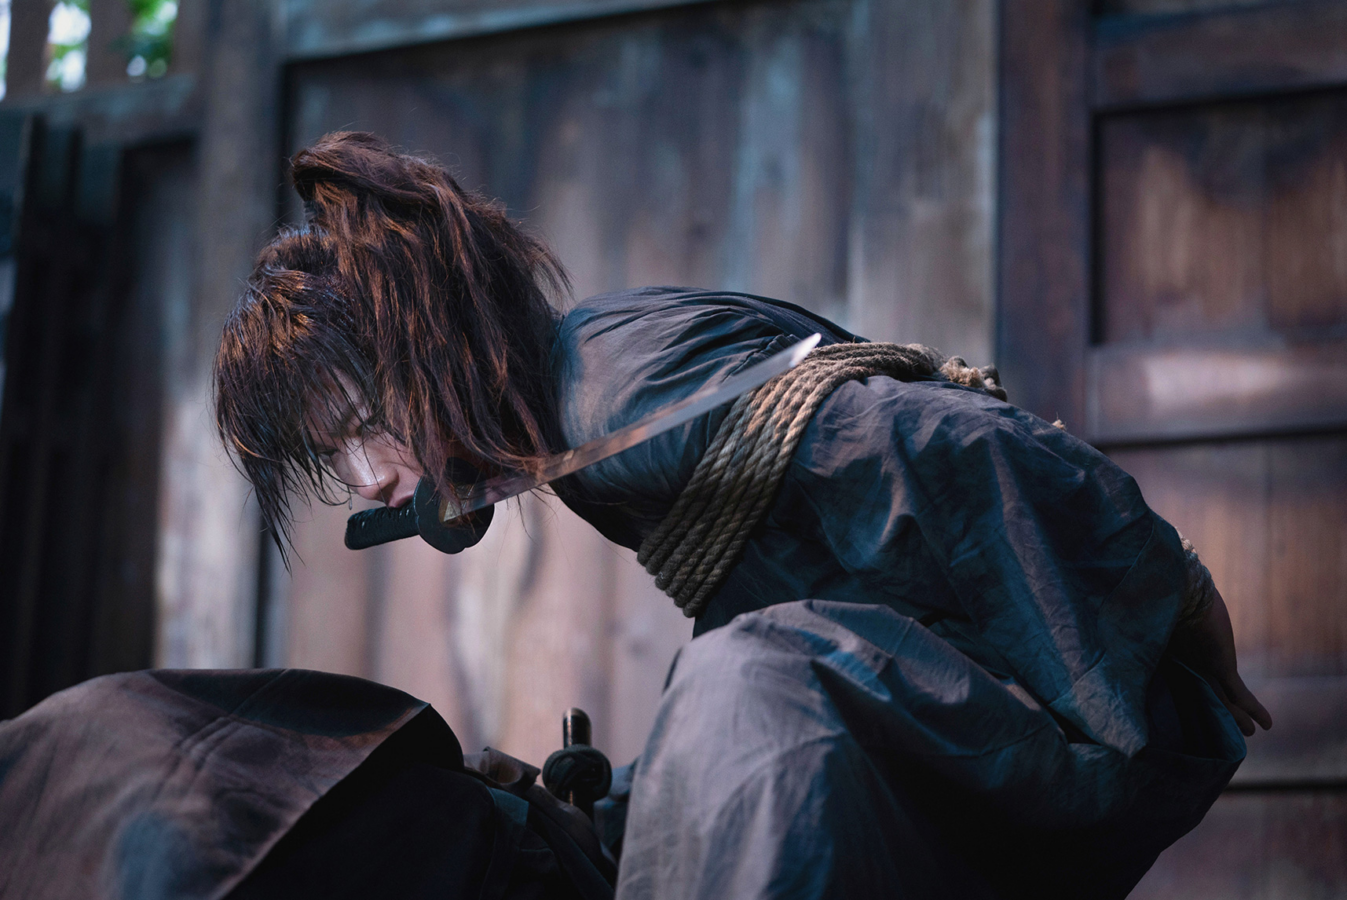 Rurouni Kenshin: The Beginning Trailer Teases End of Live-Action Series